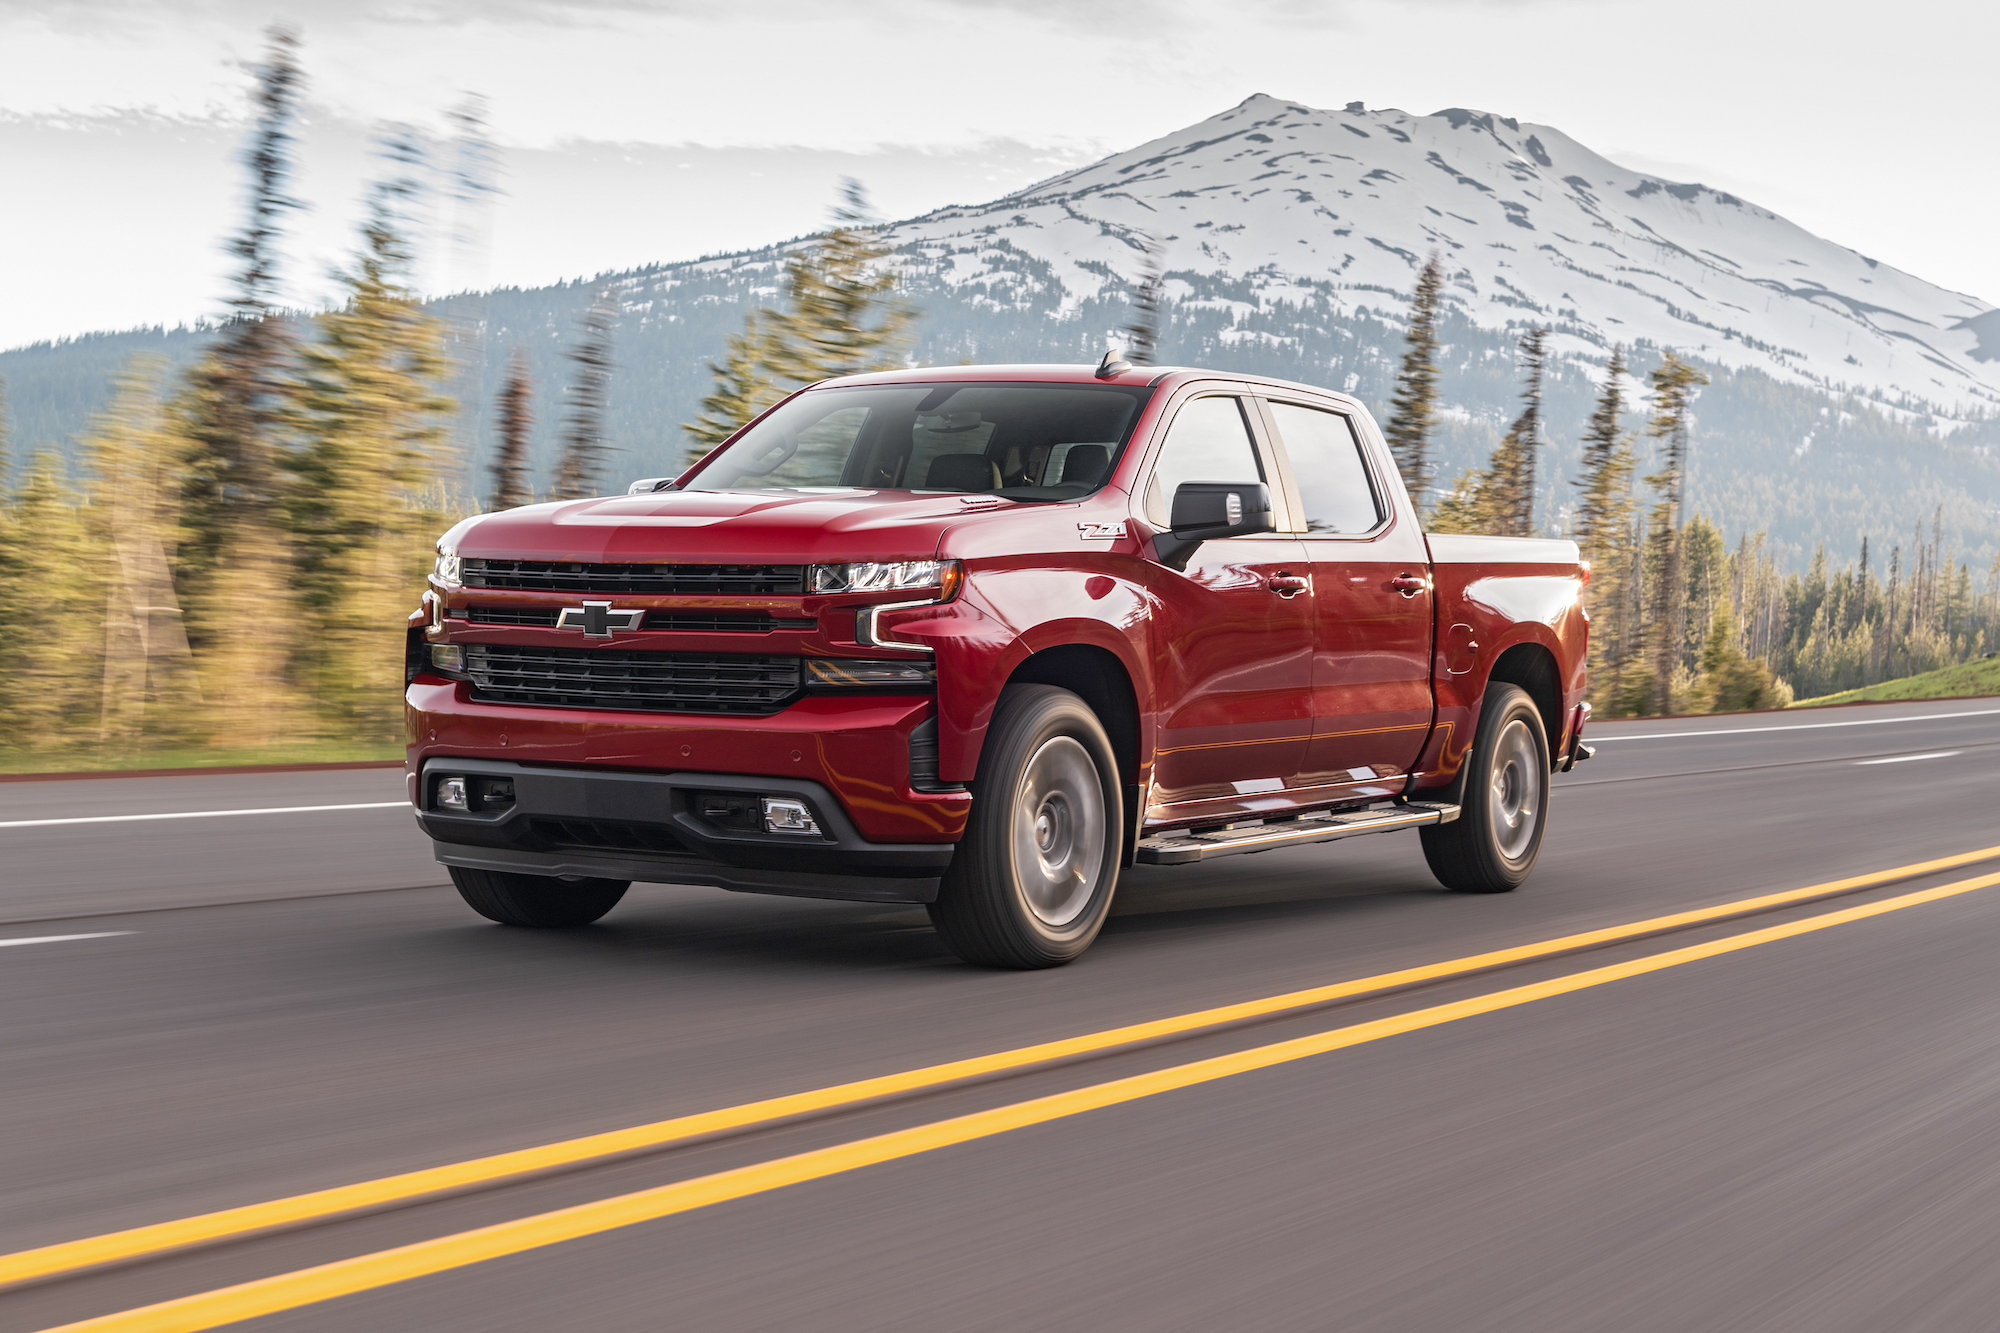 A red 2020 Chevrolet Silverado Diesel full-size pickup truck travels on a four-lane highway past pine trees and a snow-capped mountain